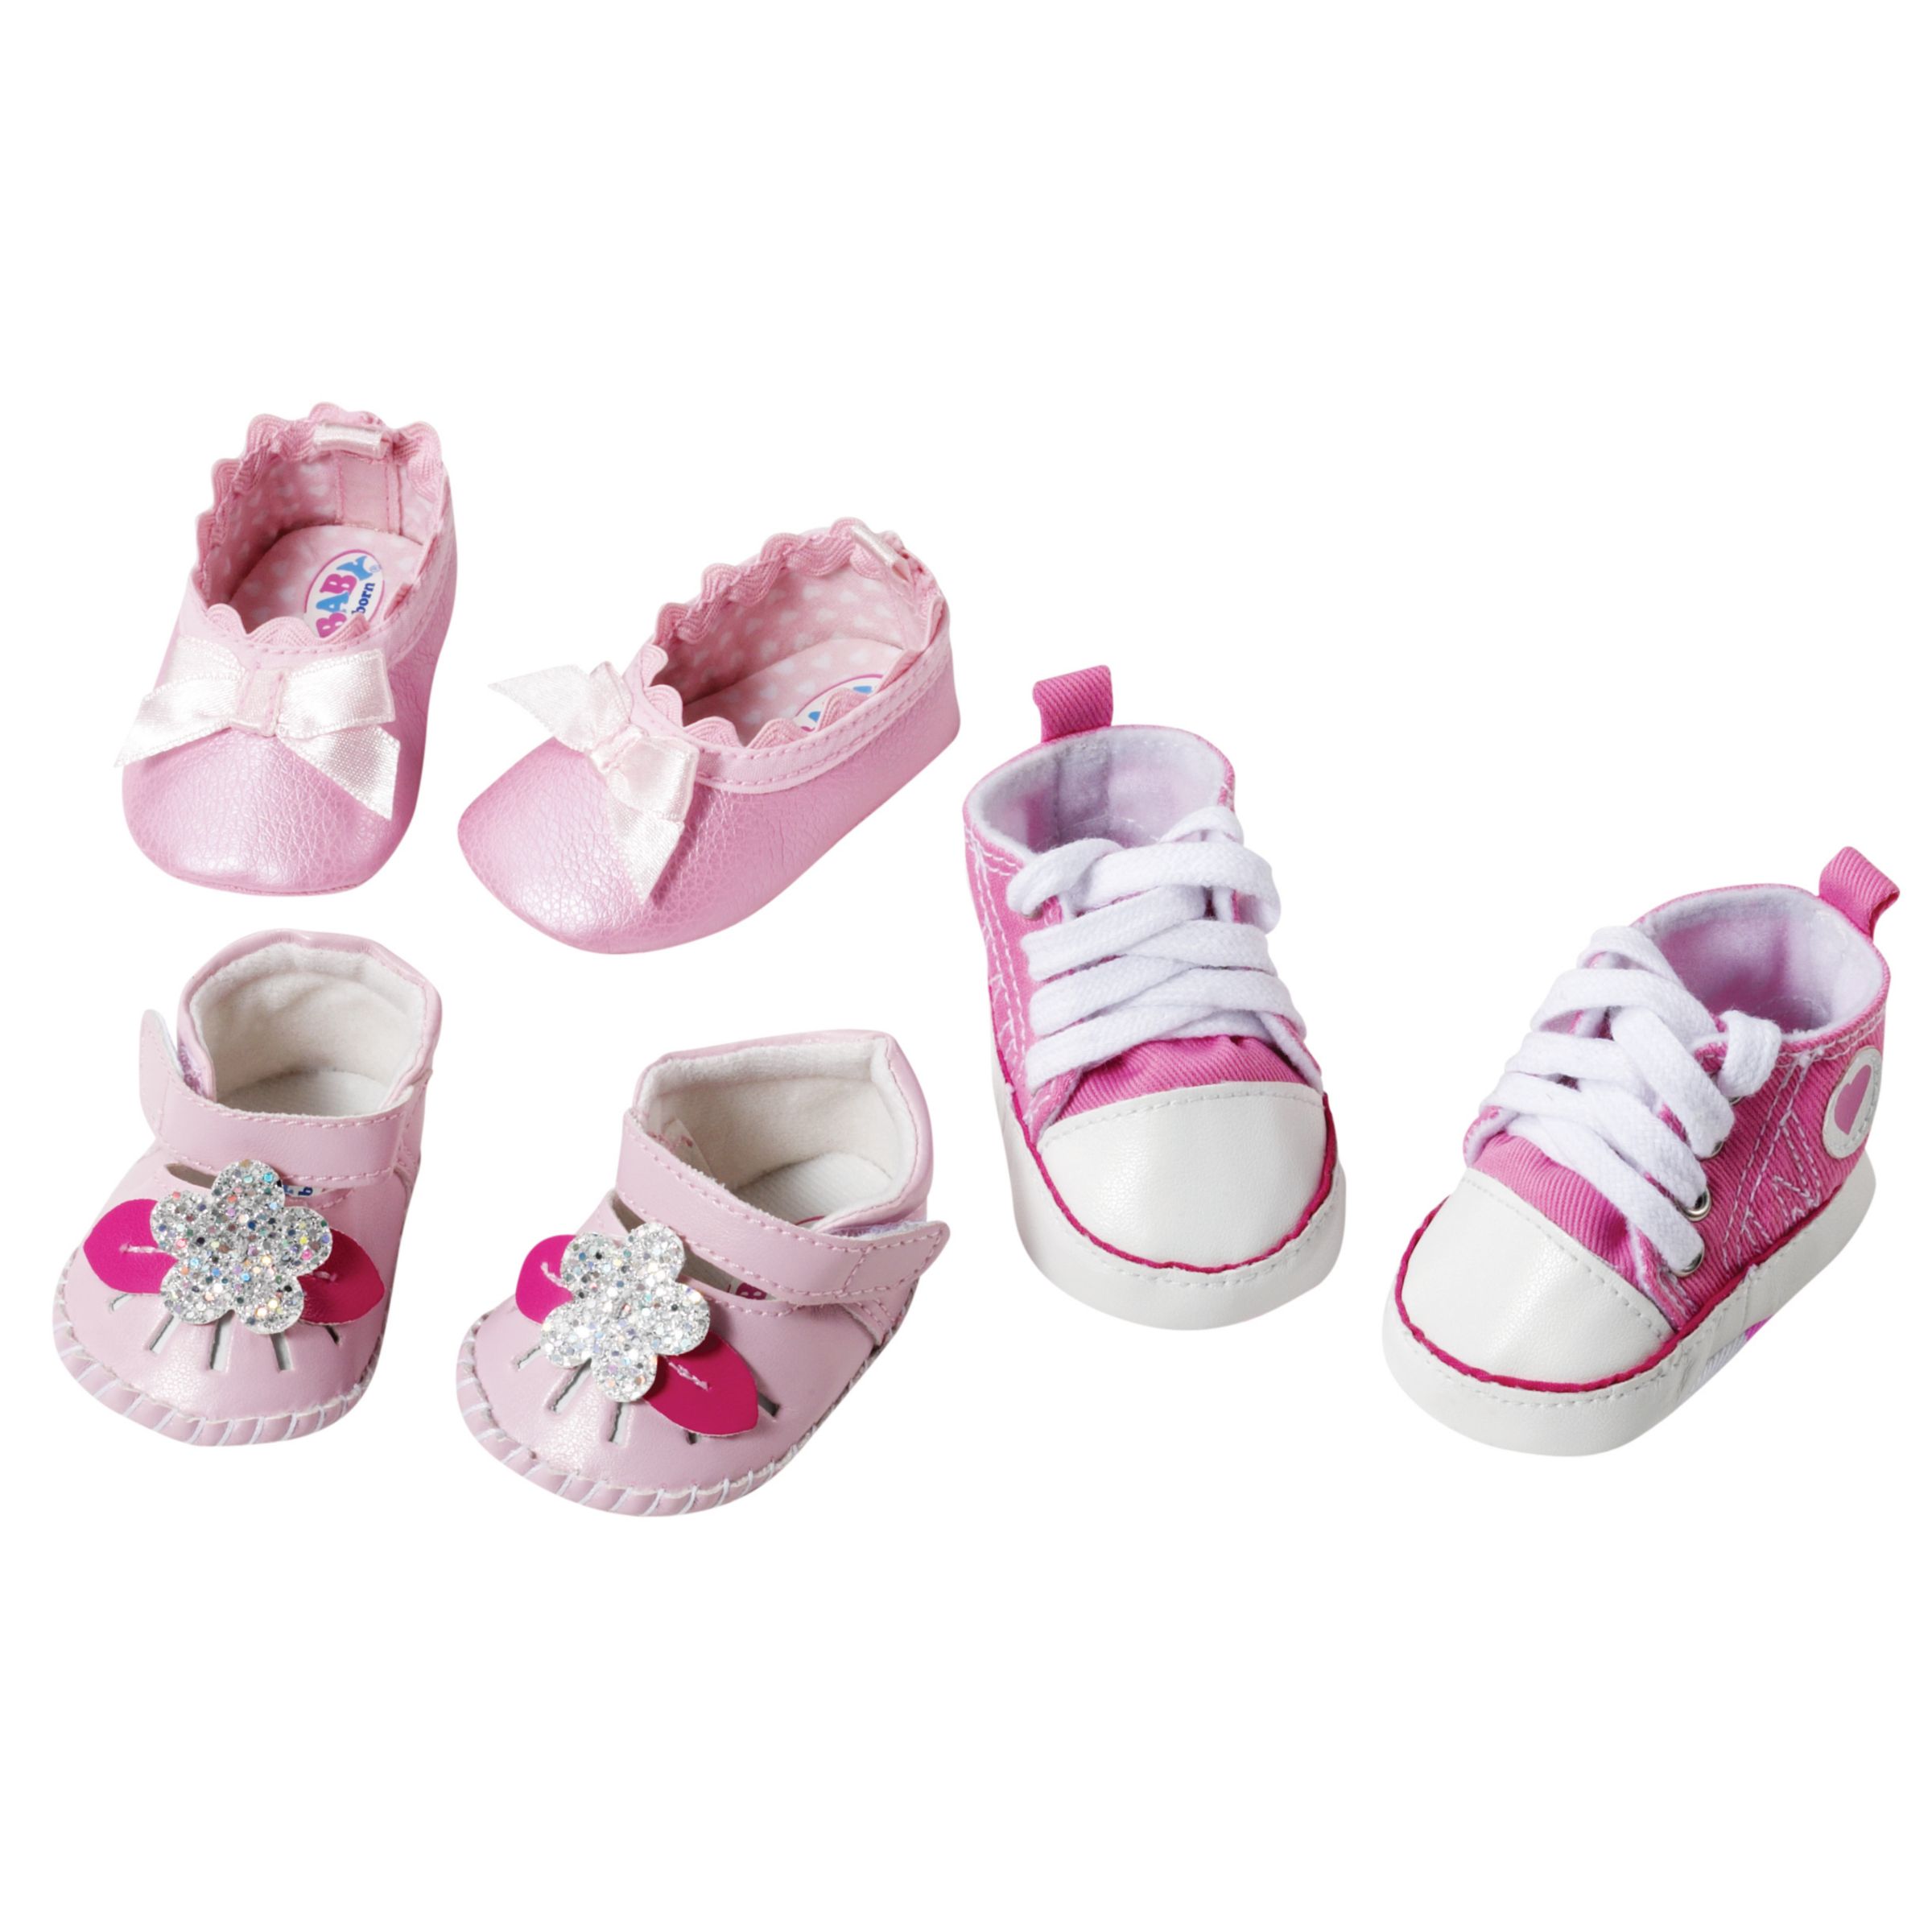  Baby Born on Buy Baby Born Pair Of Shoes  Assorted Online At Johnlewis Com   John